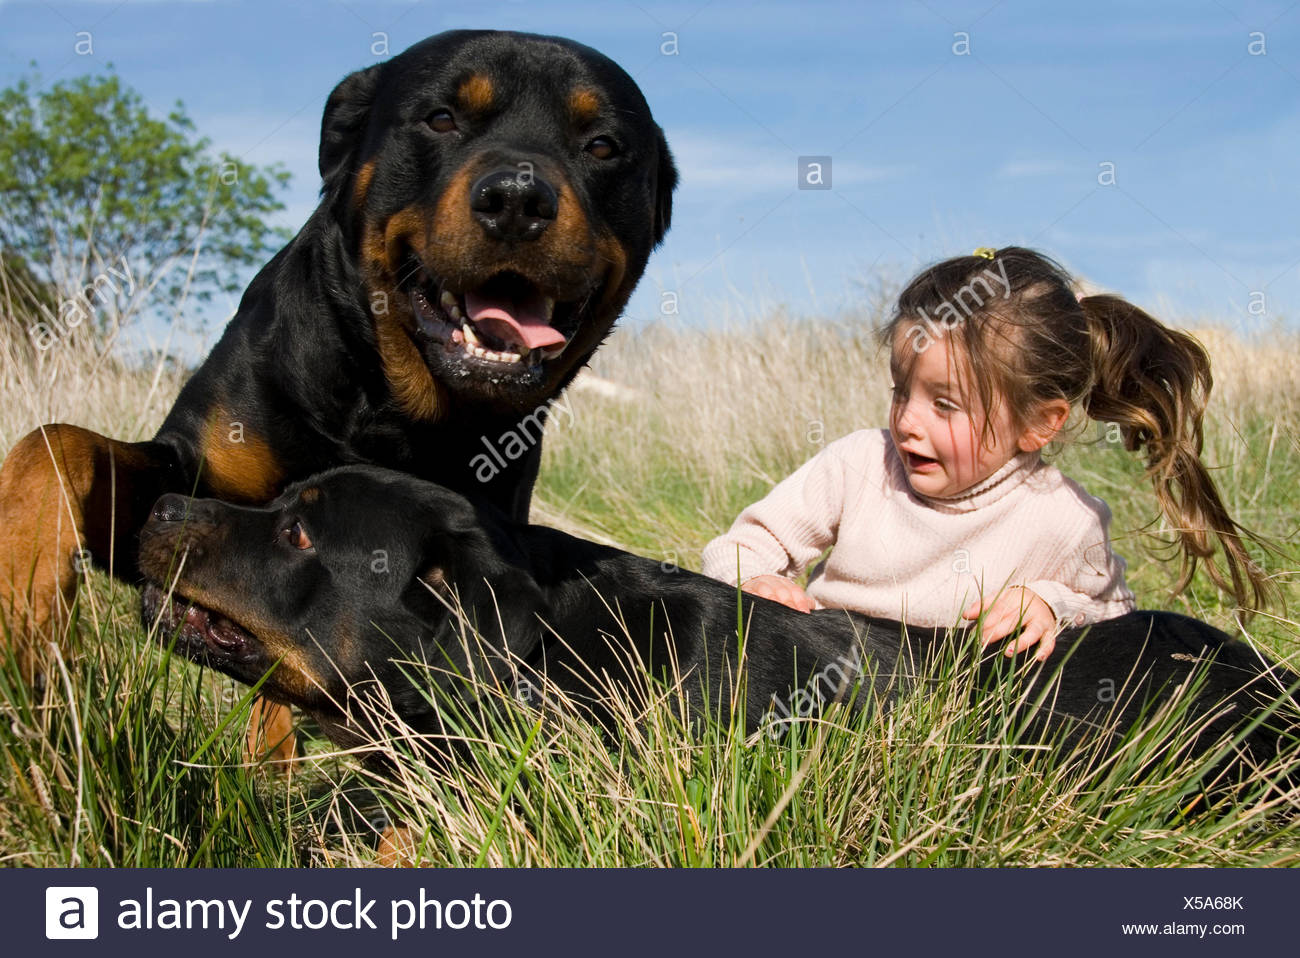 Dog Attack Child High Resolution Stock Photography And Images Alamy